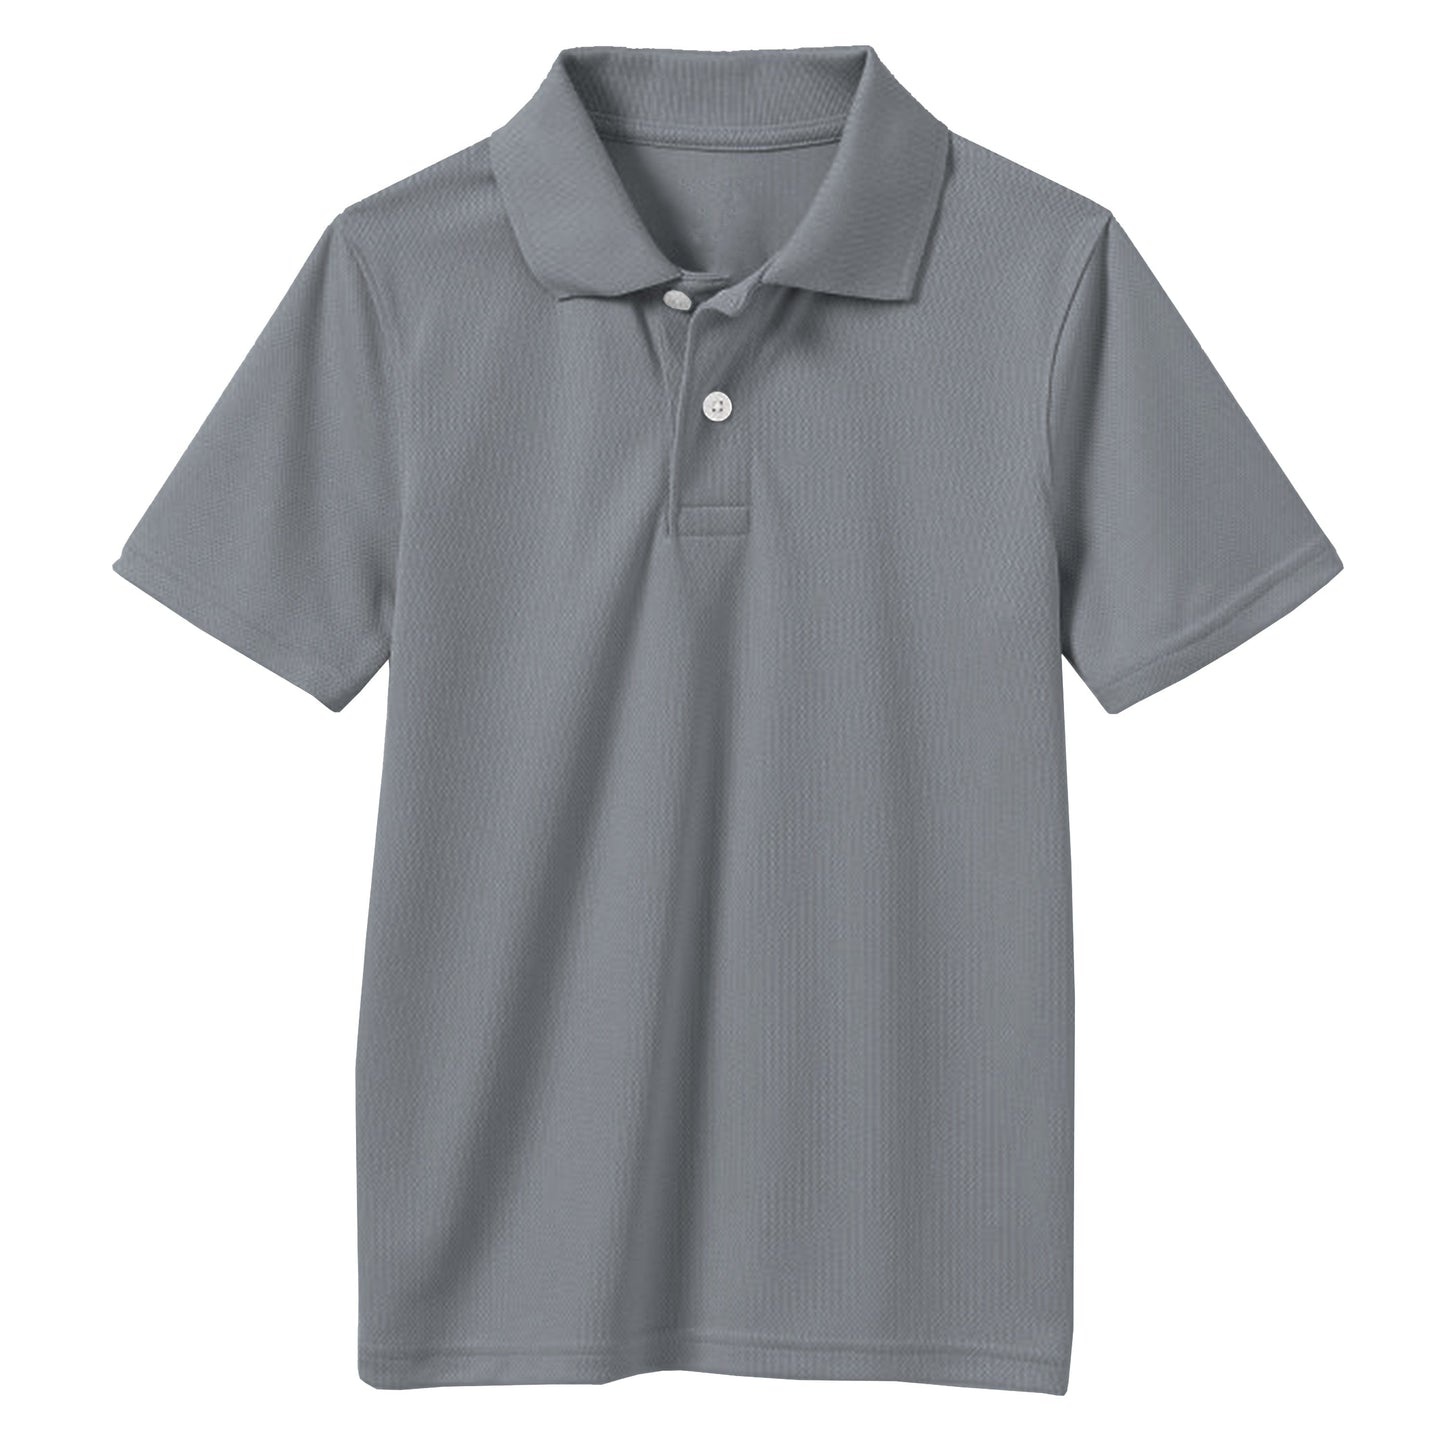 Children & Boy's Short Sleeve Moisture Wicking Polo Shirts (Sizes, 4 to 20) - GalaxybyHarvic